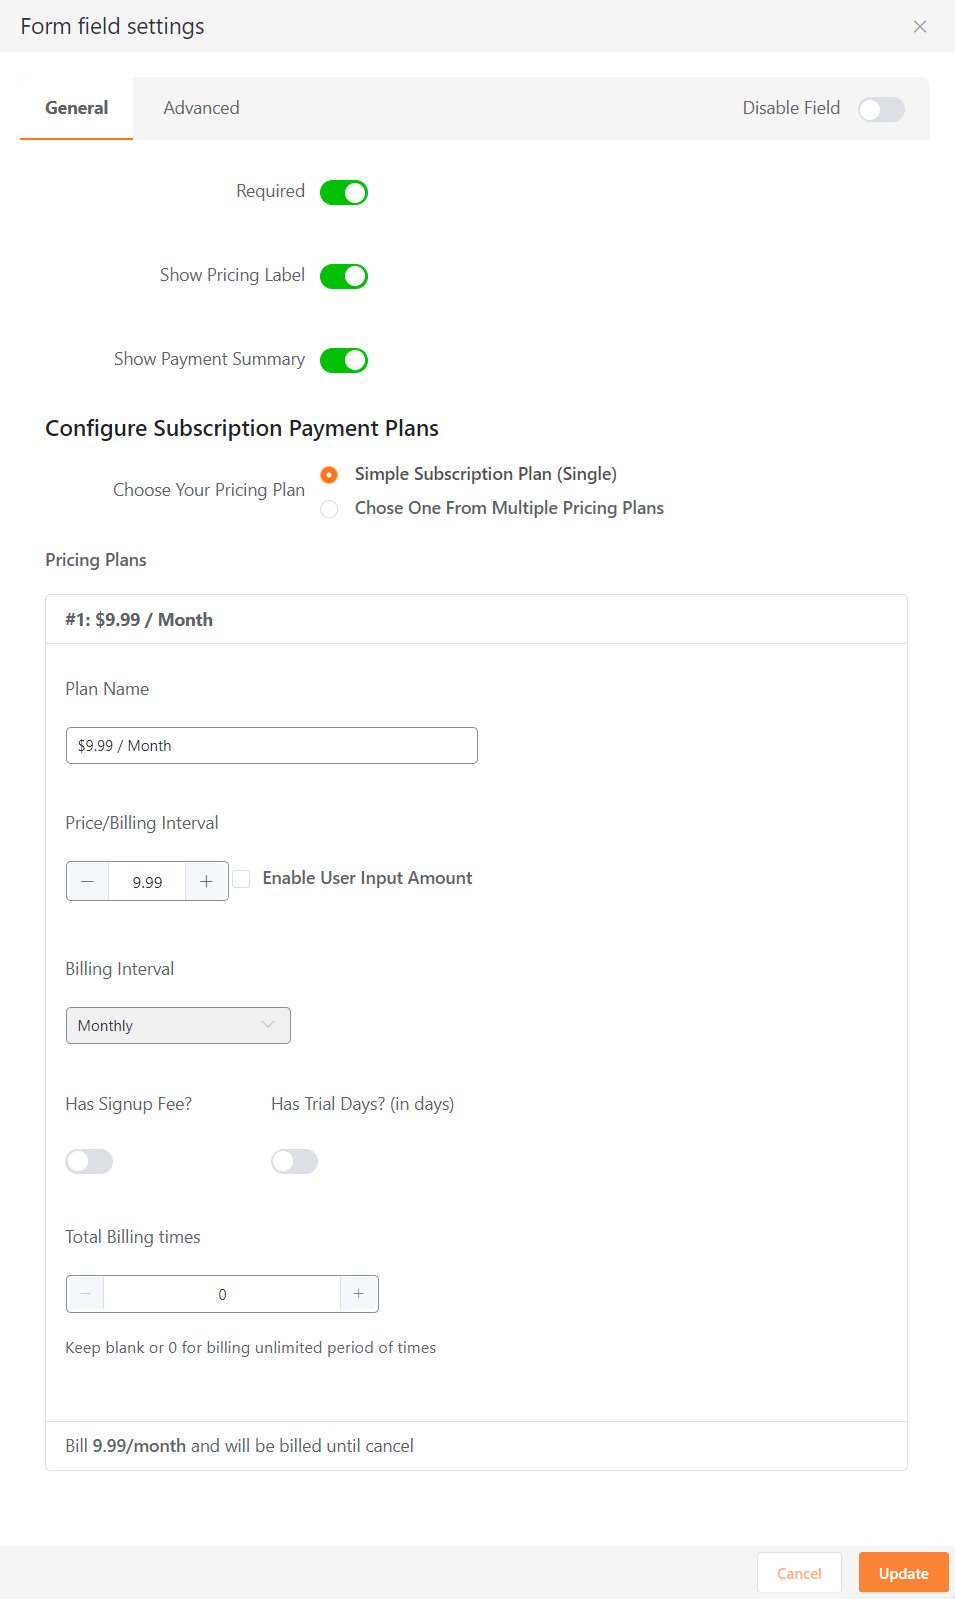 General Settings of Subscription Payment